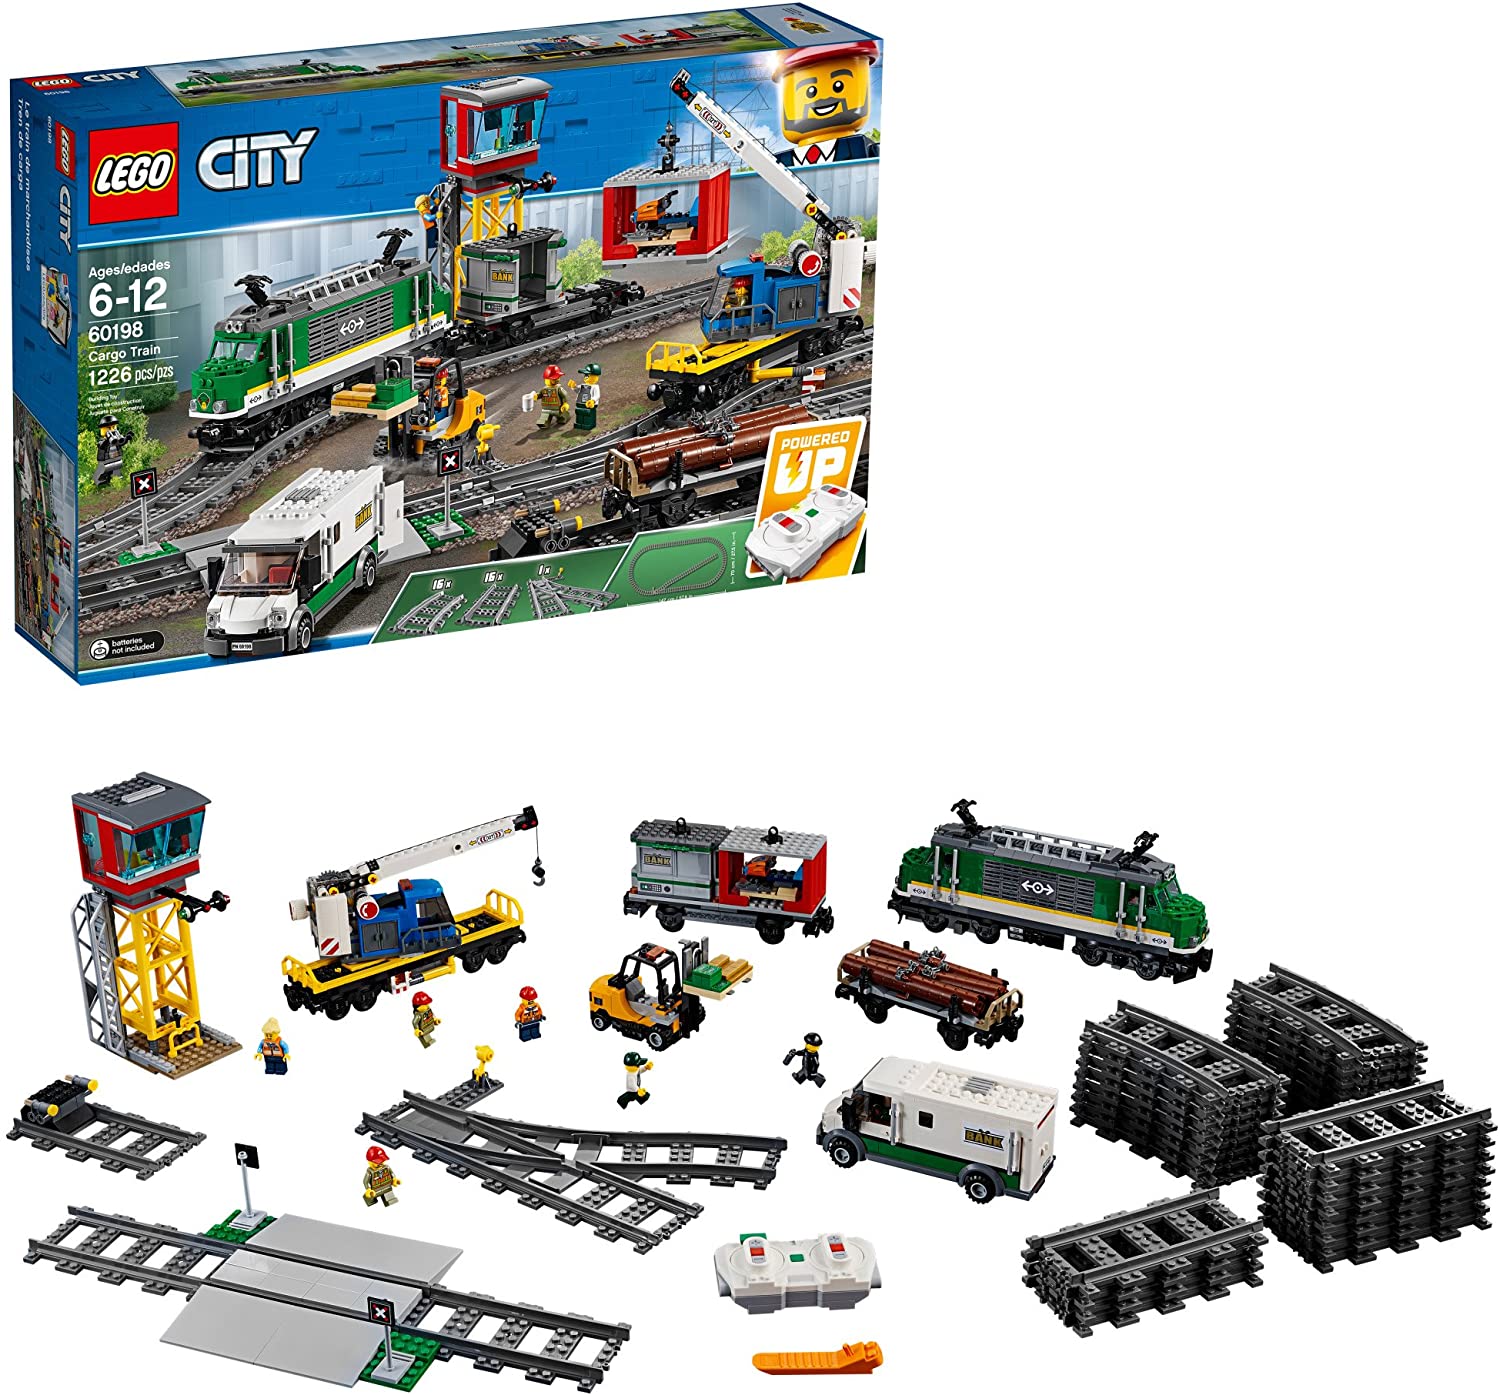 9 Best LEGO Train Set 2022 - Buying Guide & Reviews 4